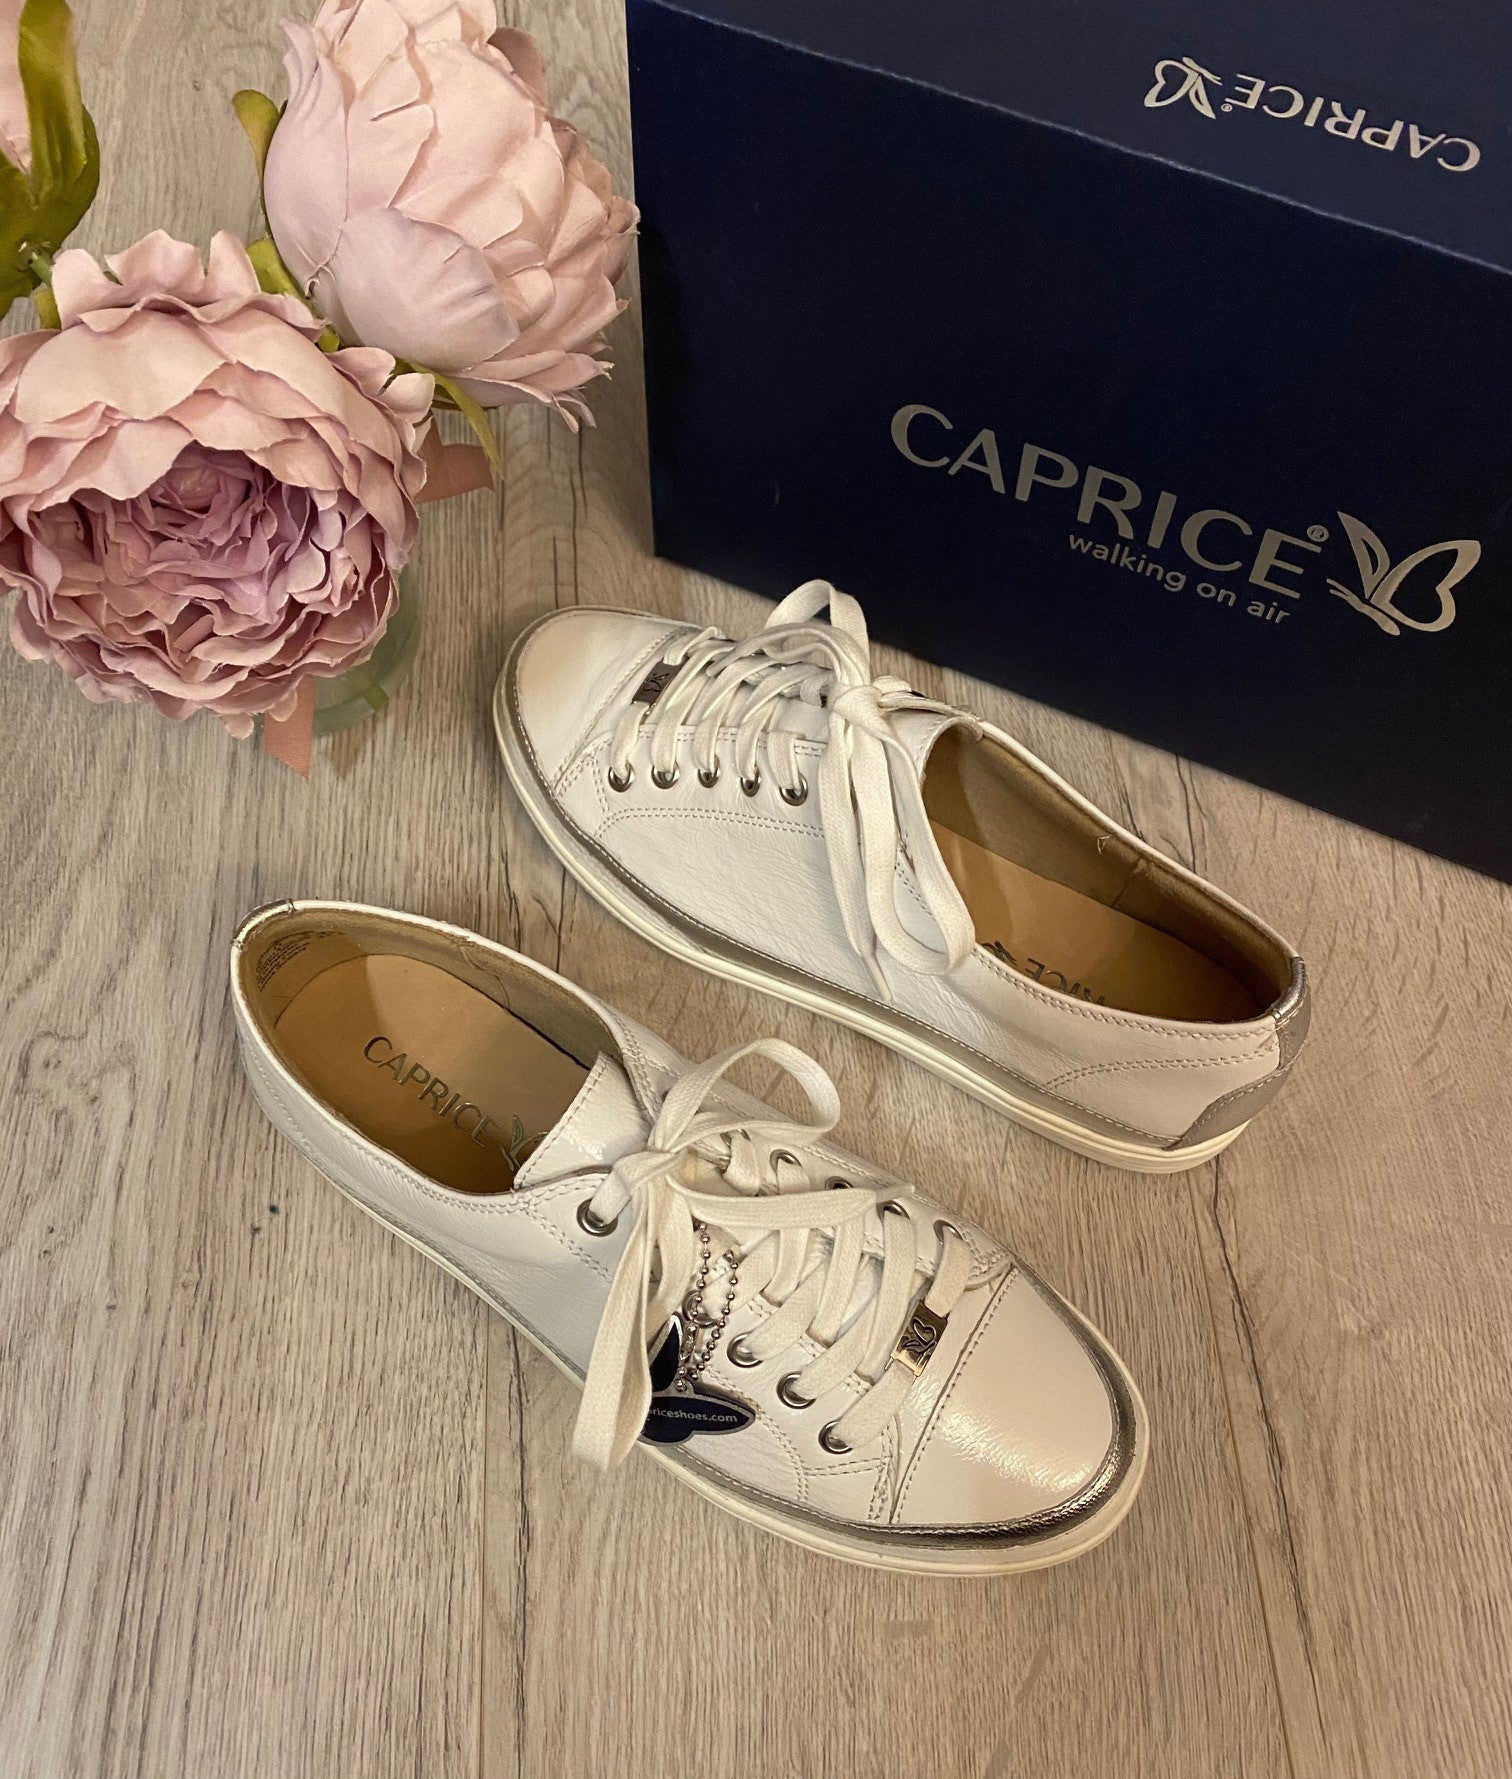 Caprice Patent Leather Trainers in White